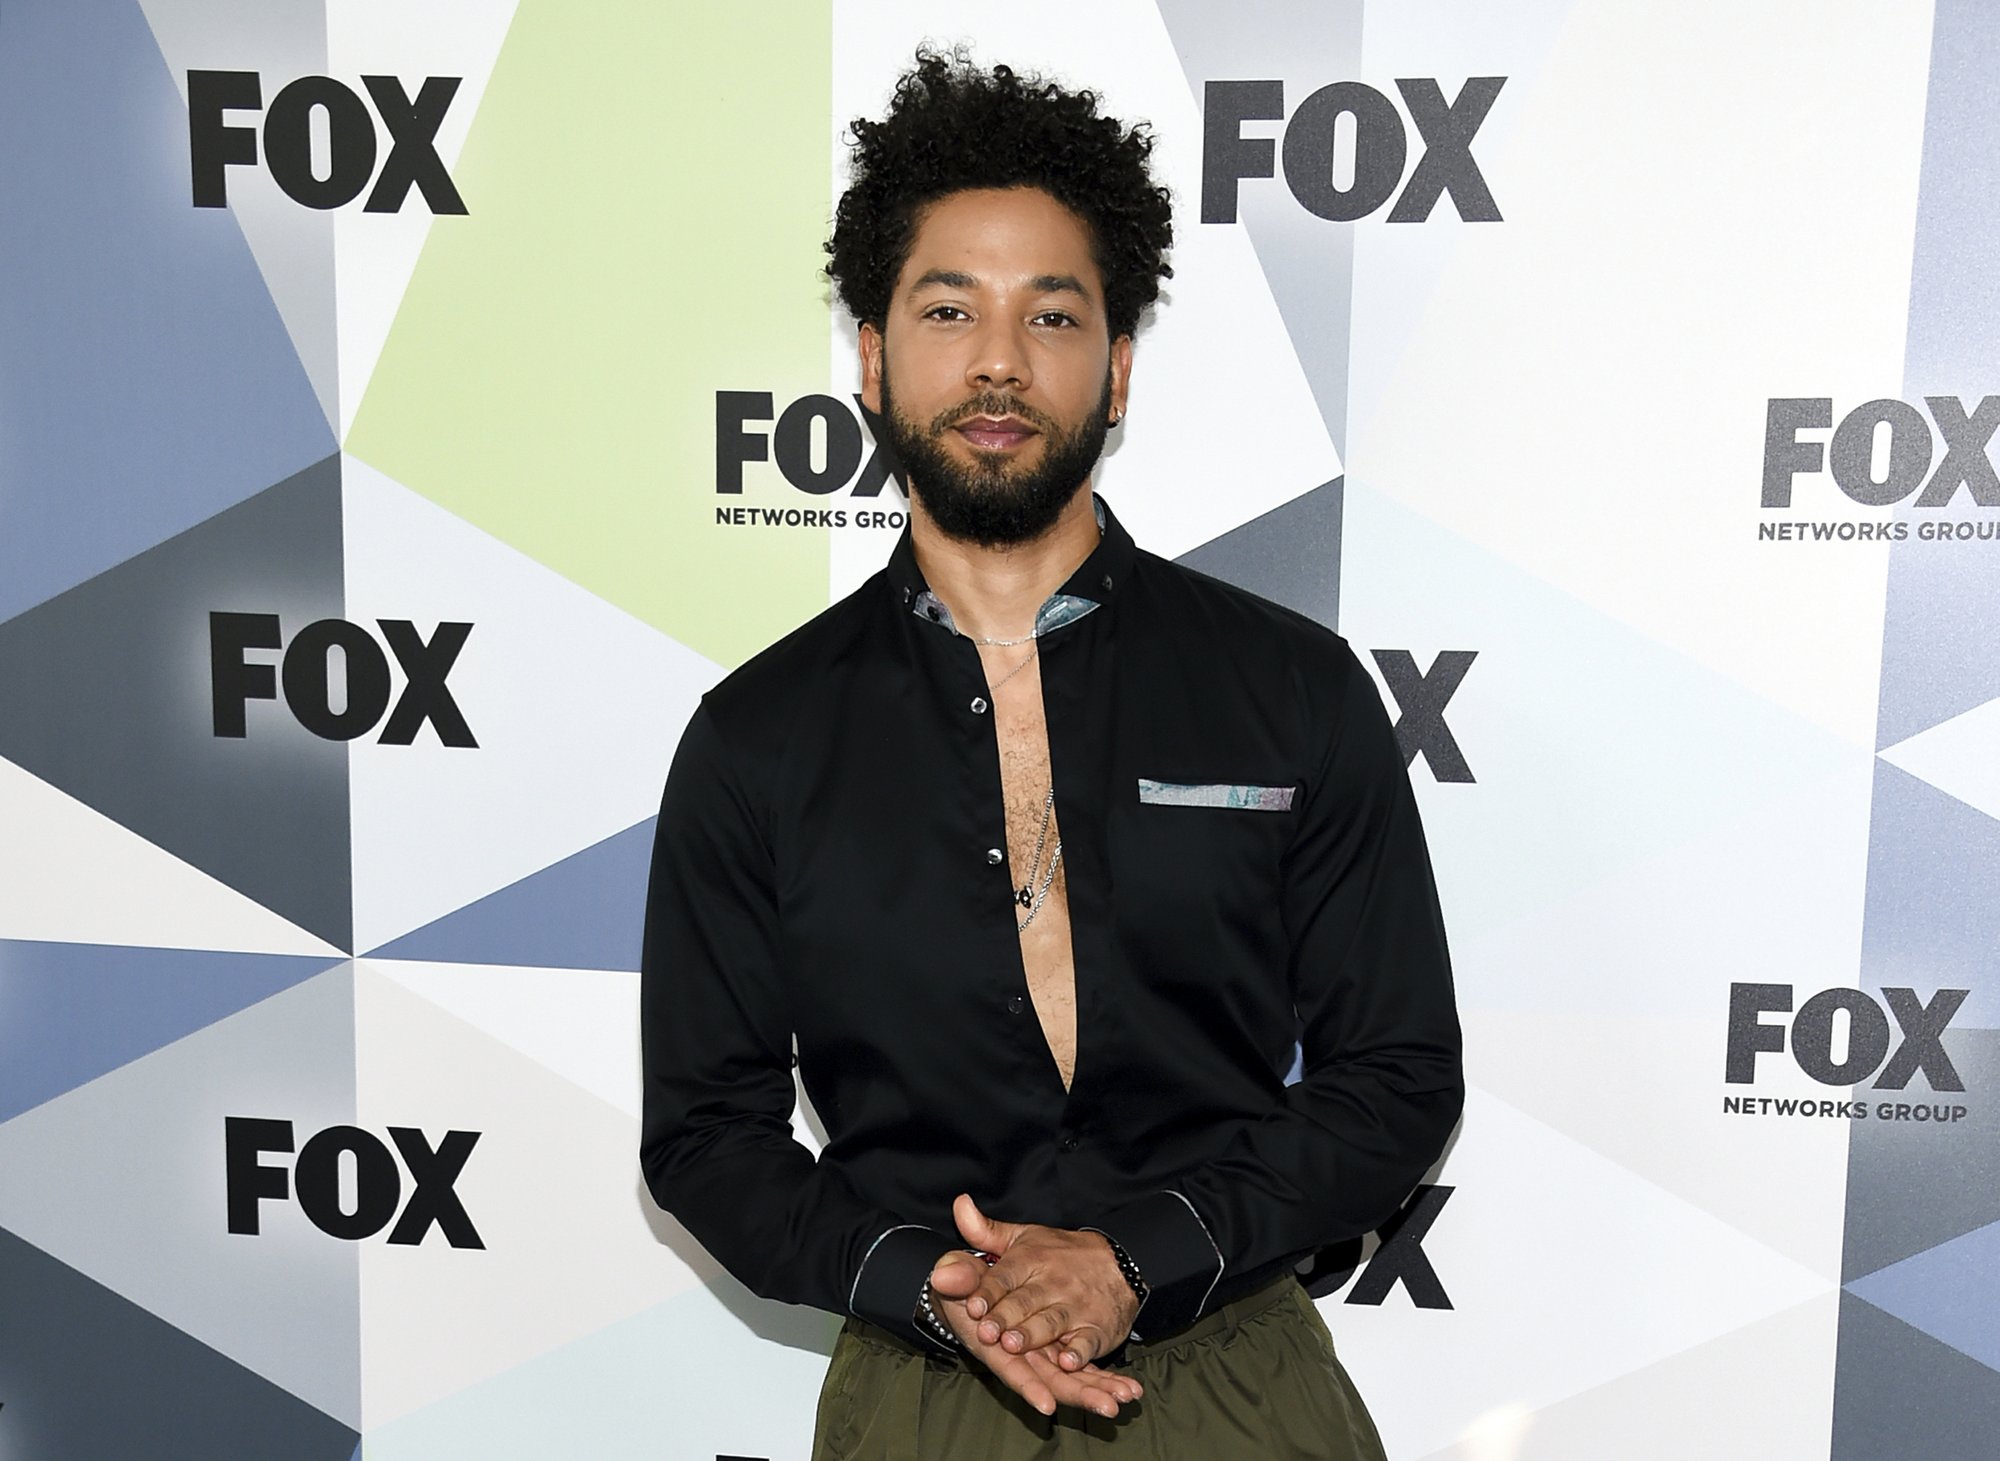 FILE - In this Monday, May 14, 2018 file photo, actor and singer Jussie Smollett attends the Fox Networks Group 2018 programming presentation after party at Wollman Rink in Central Park in New York. Photo: AP